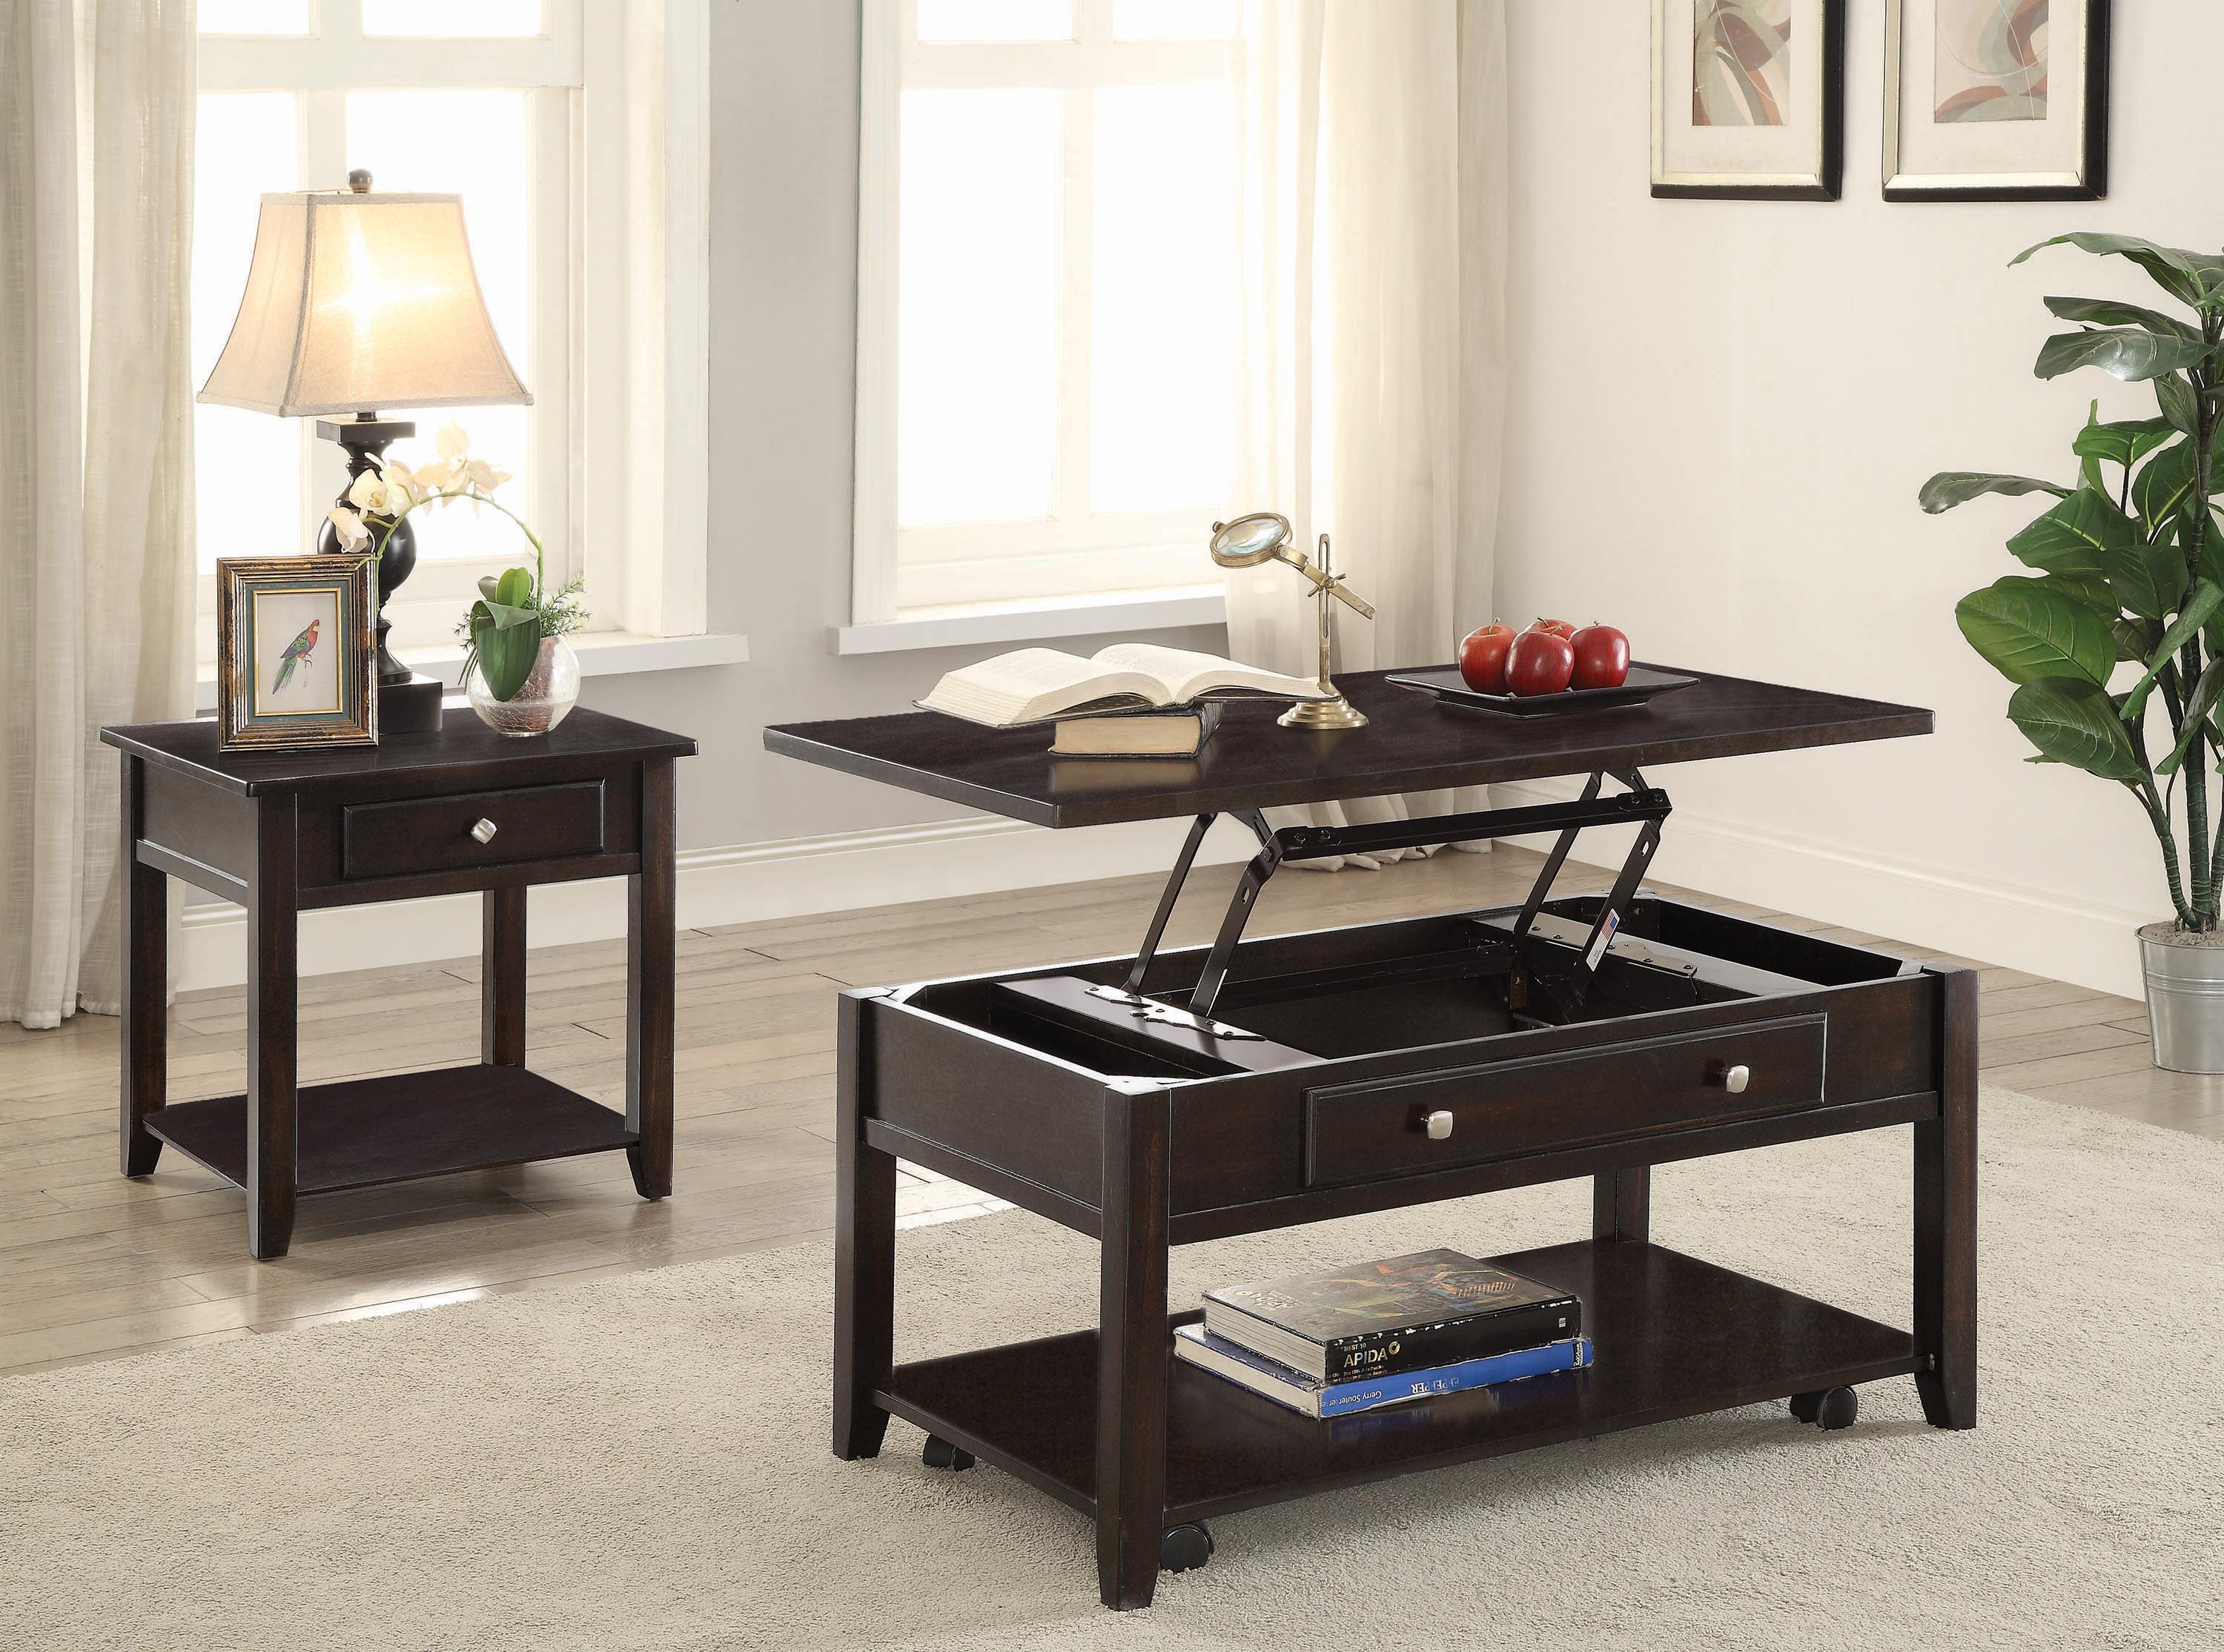 Transitional Coffee Table Set 721038-S2 721038-S2 in Walnut 